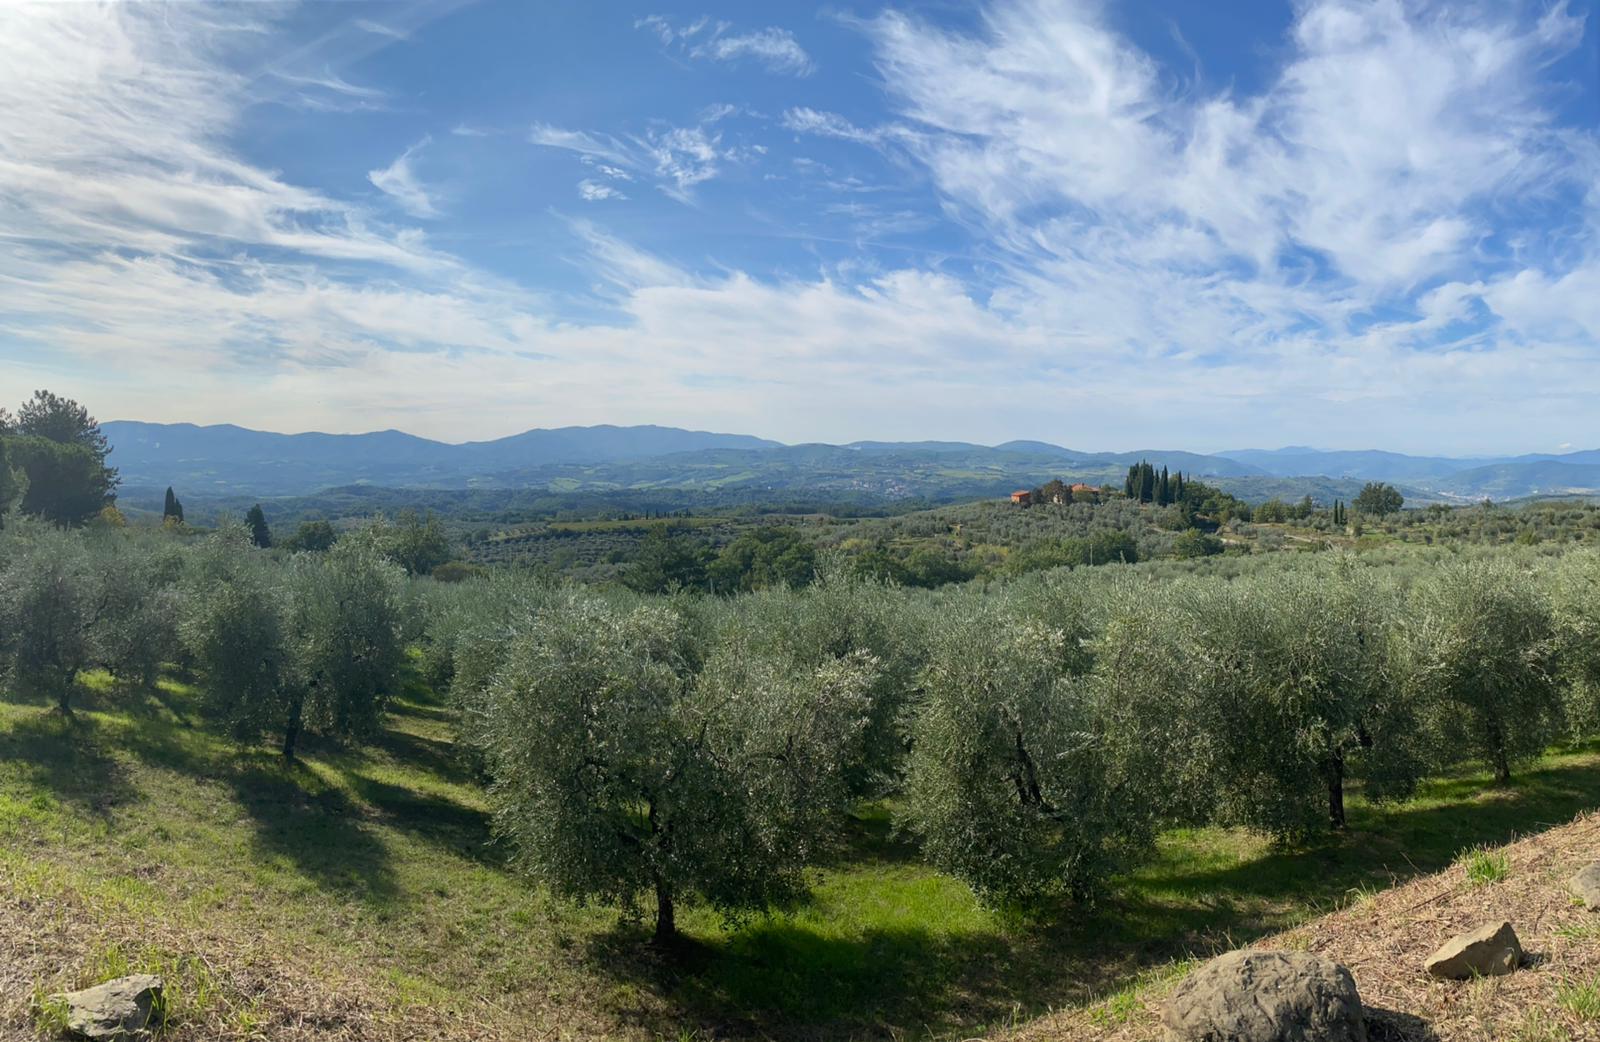 The olive groves